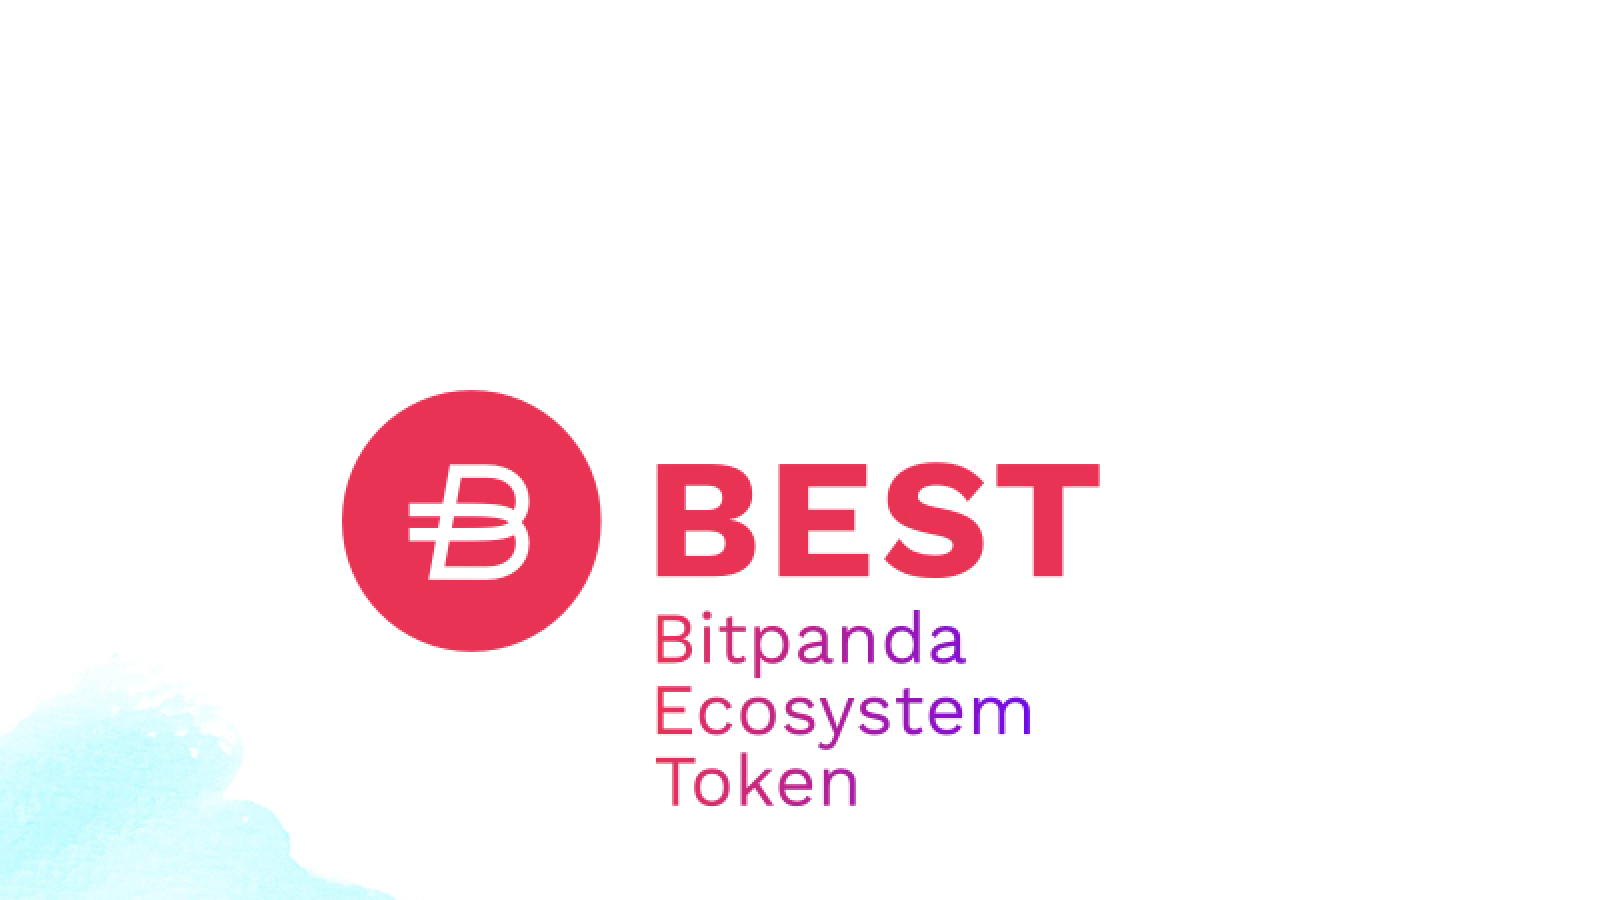 Bitpanda raises €10 million in private sale for its coin BEST and launches public sale